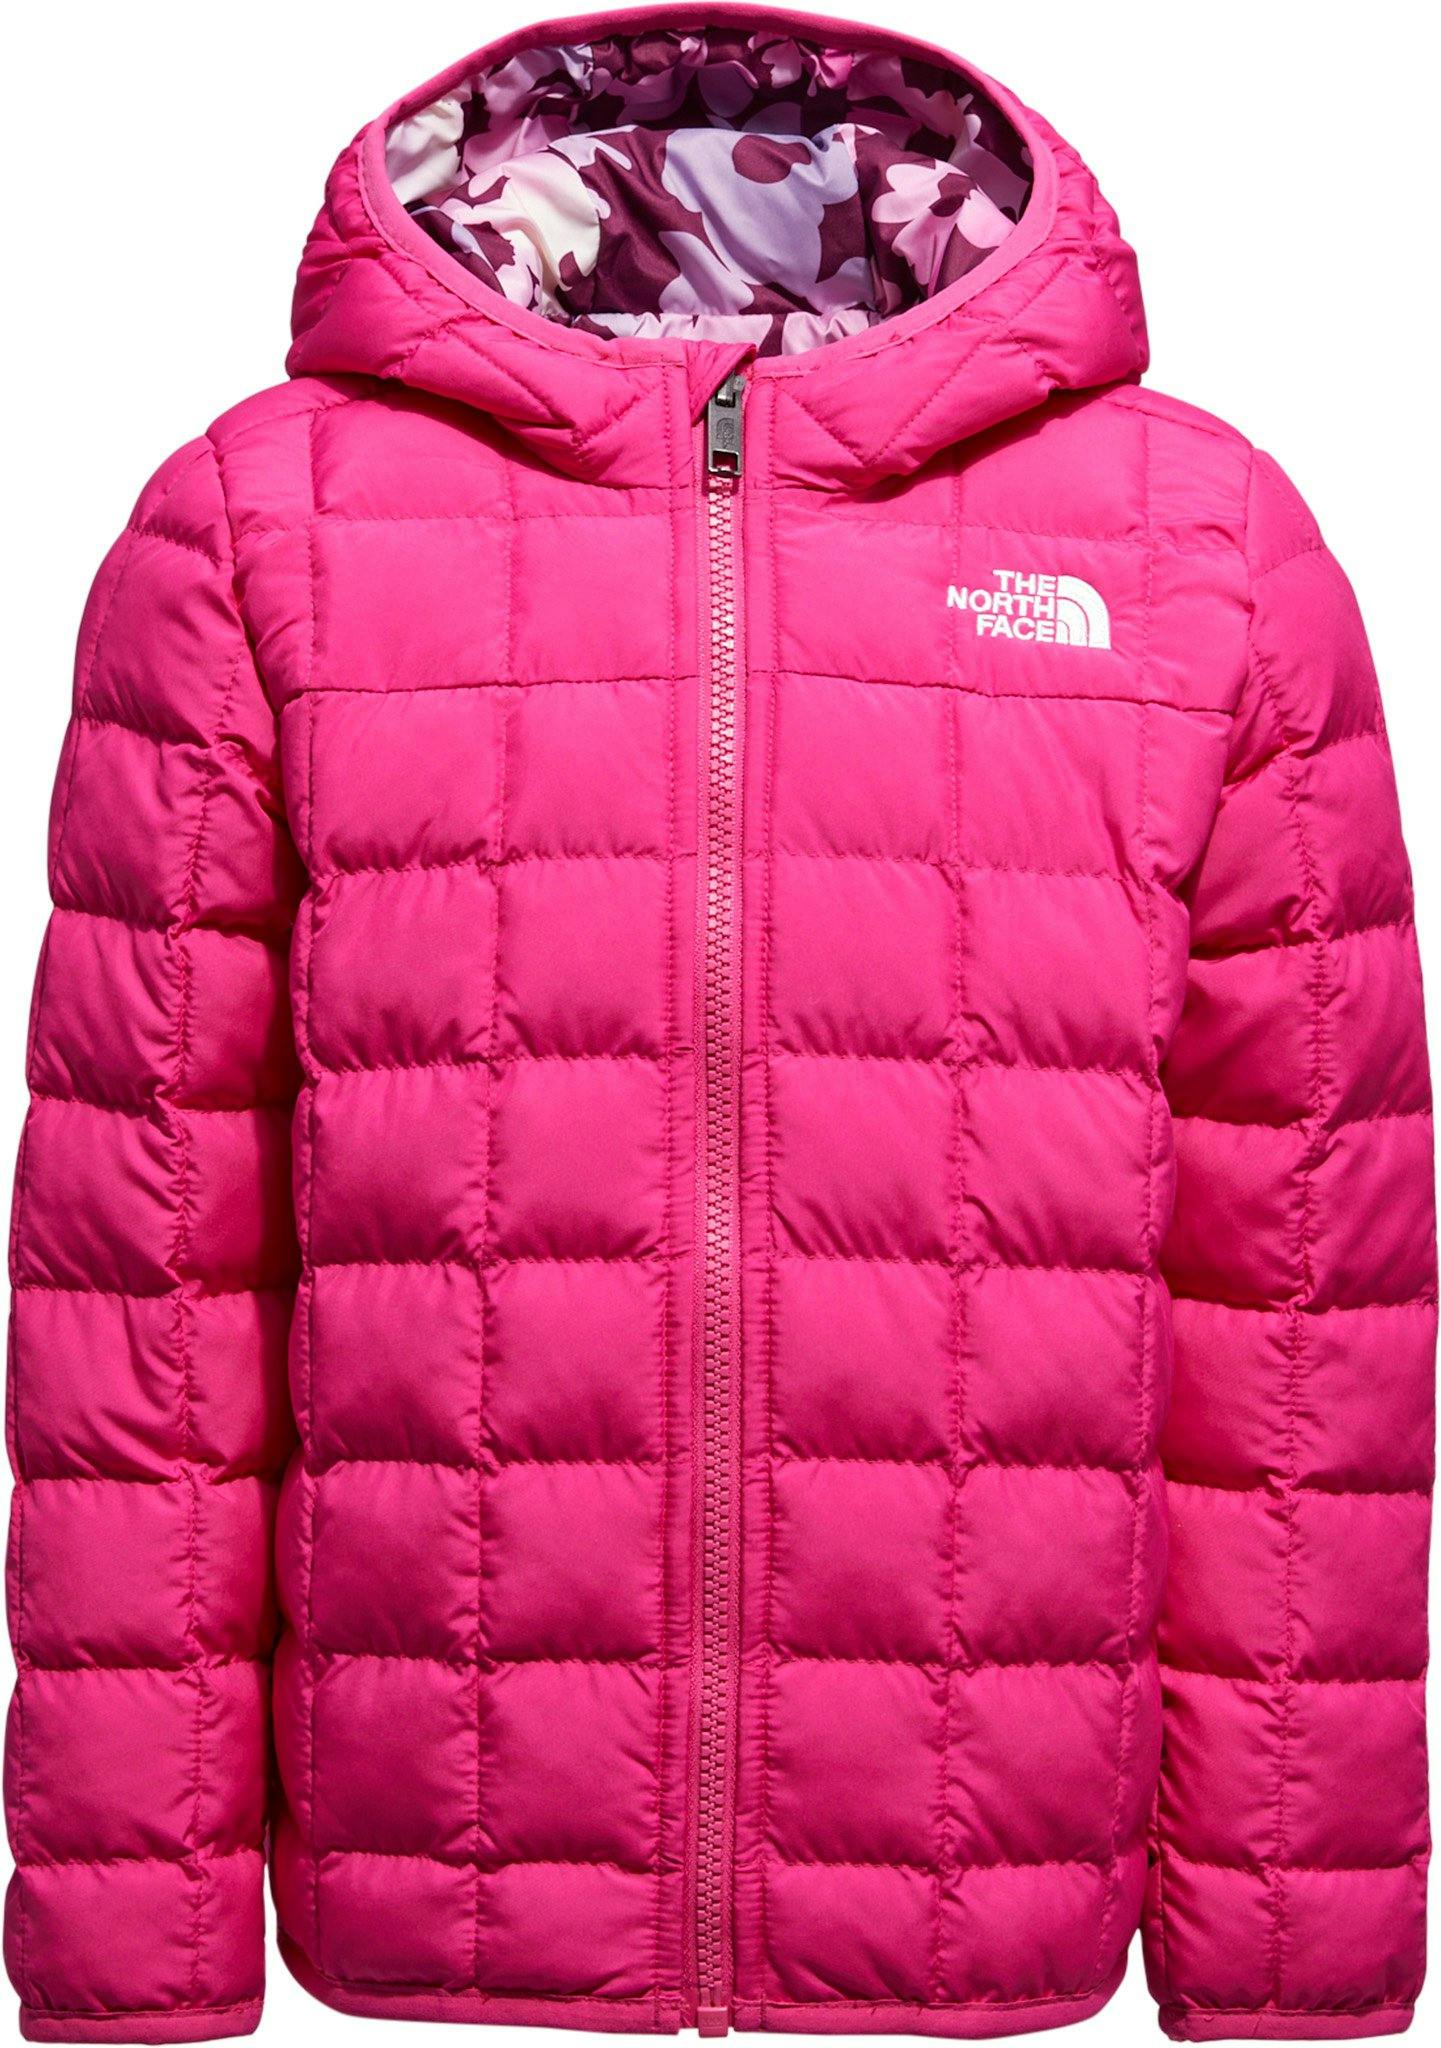 Product image for ThermoBall Reversible Hooded Jacket - Kids